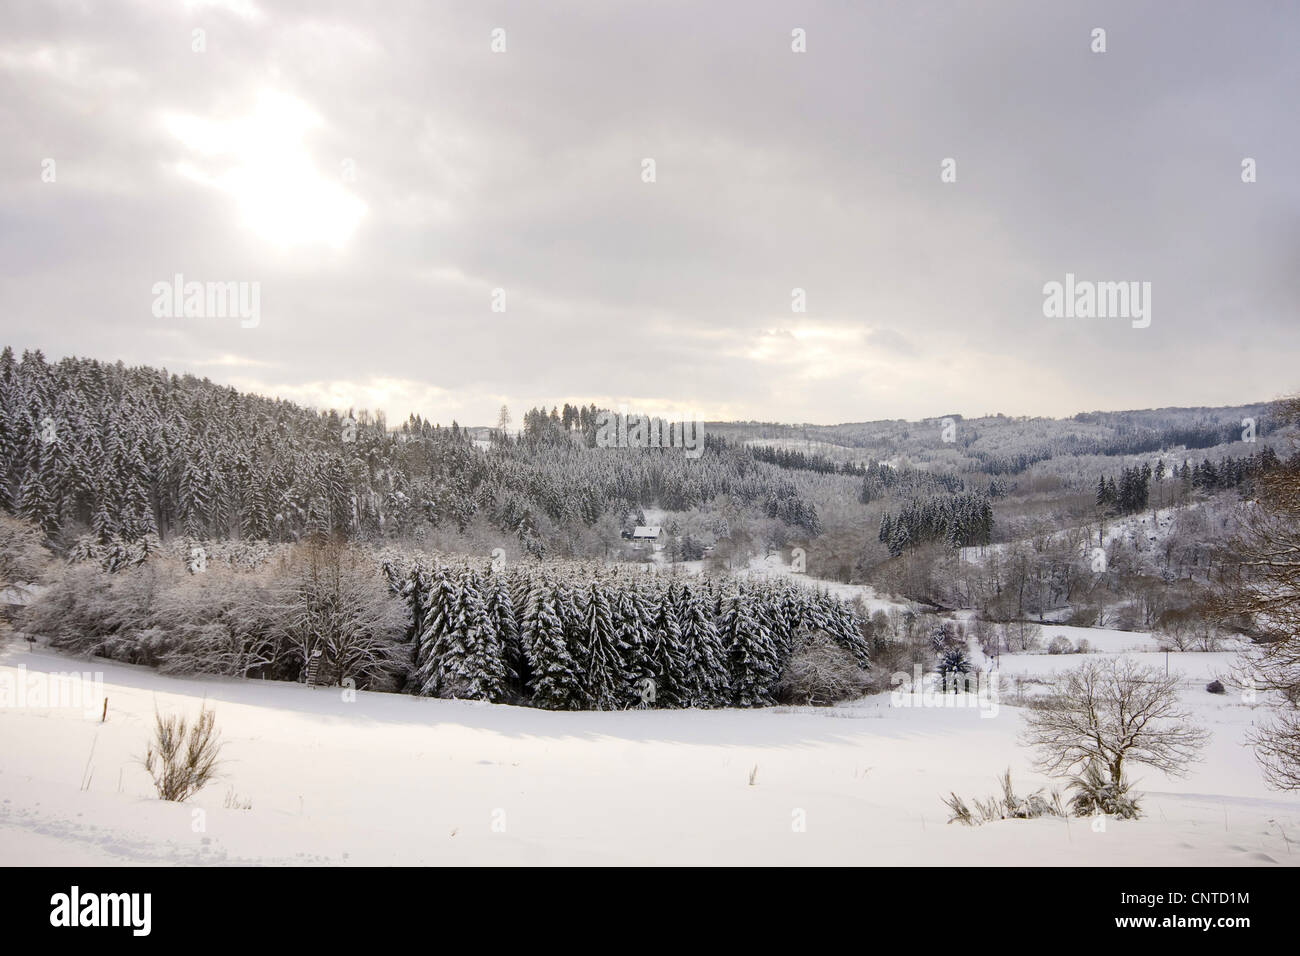 single residential building in a snow covered forest and meadow landscape, Germany, Rhineland-Palatinate, Niederfischbach Stock Photo